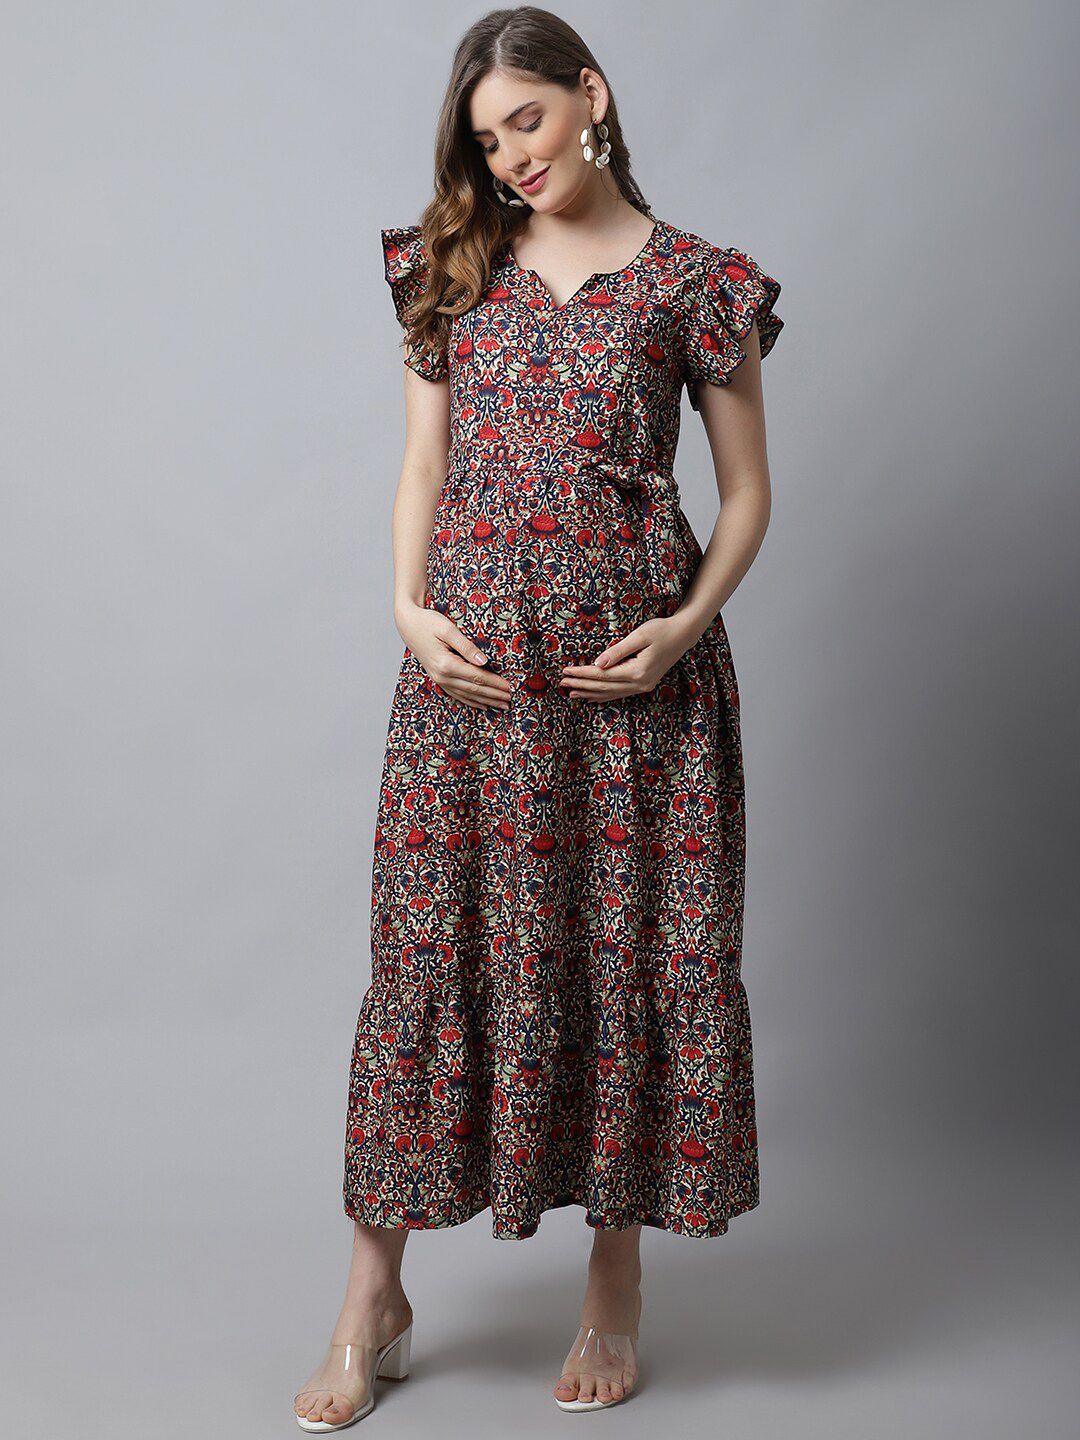 Frempy Red Floral Printed Crepe Maternity Maxi Dress Price in India